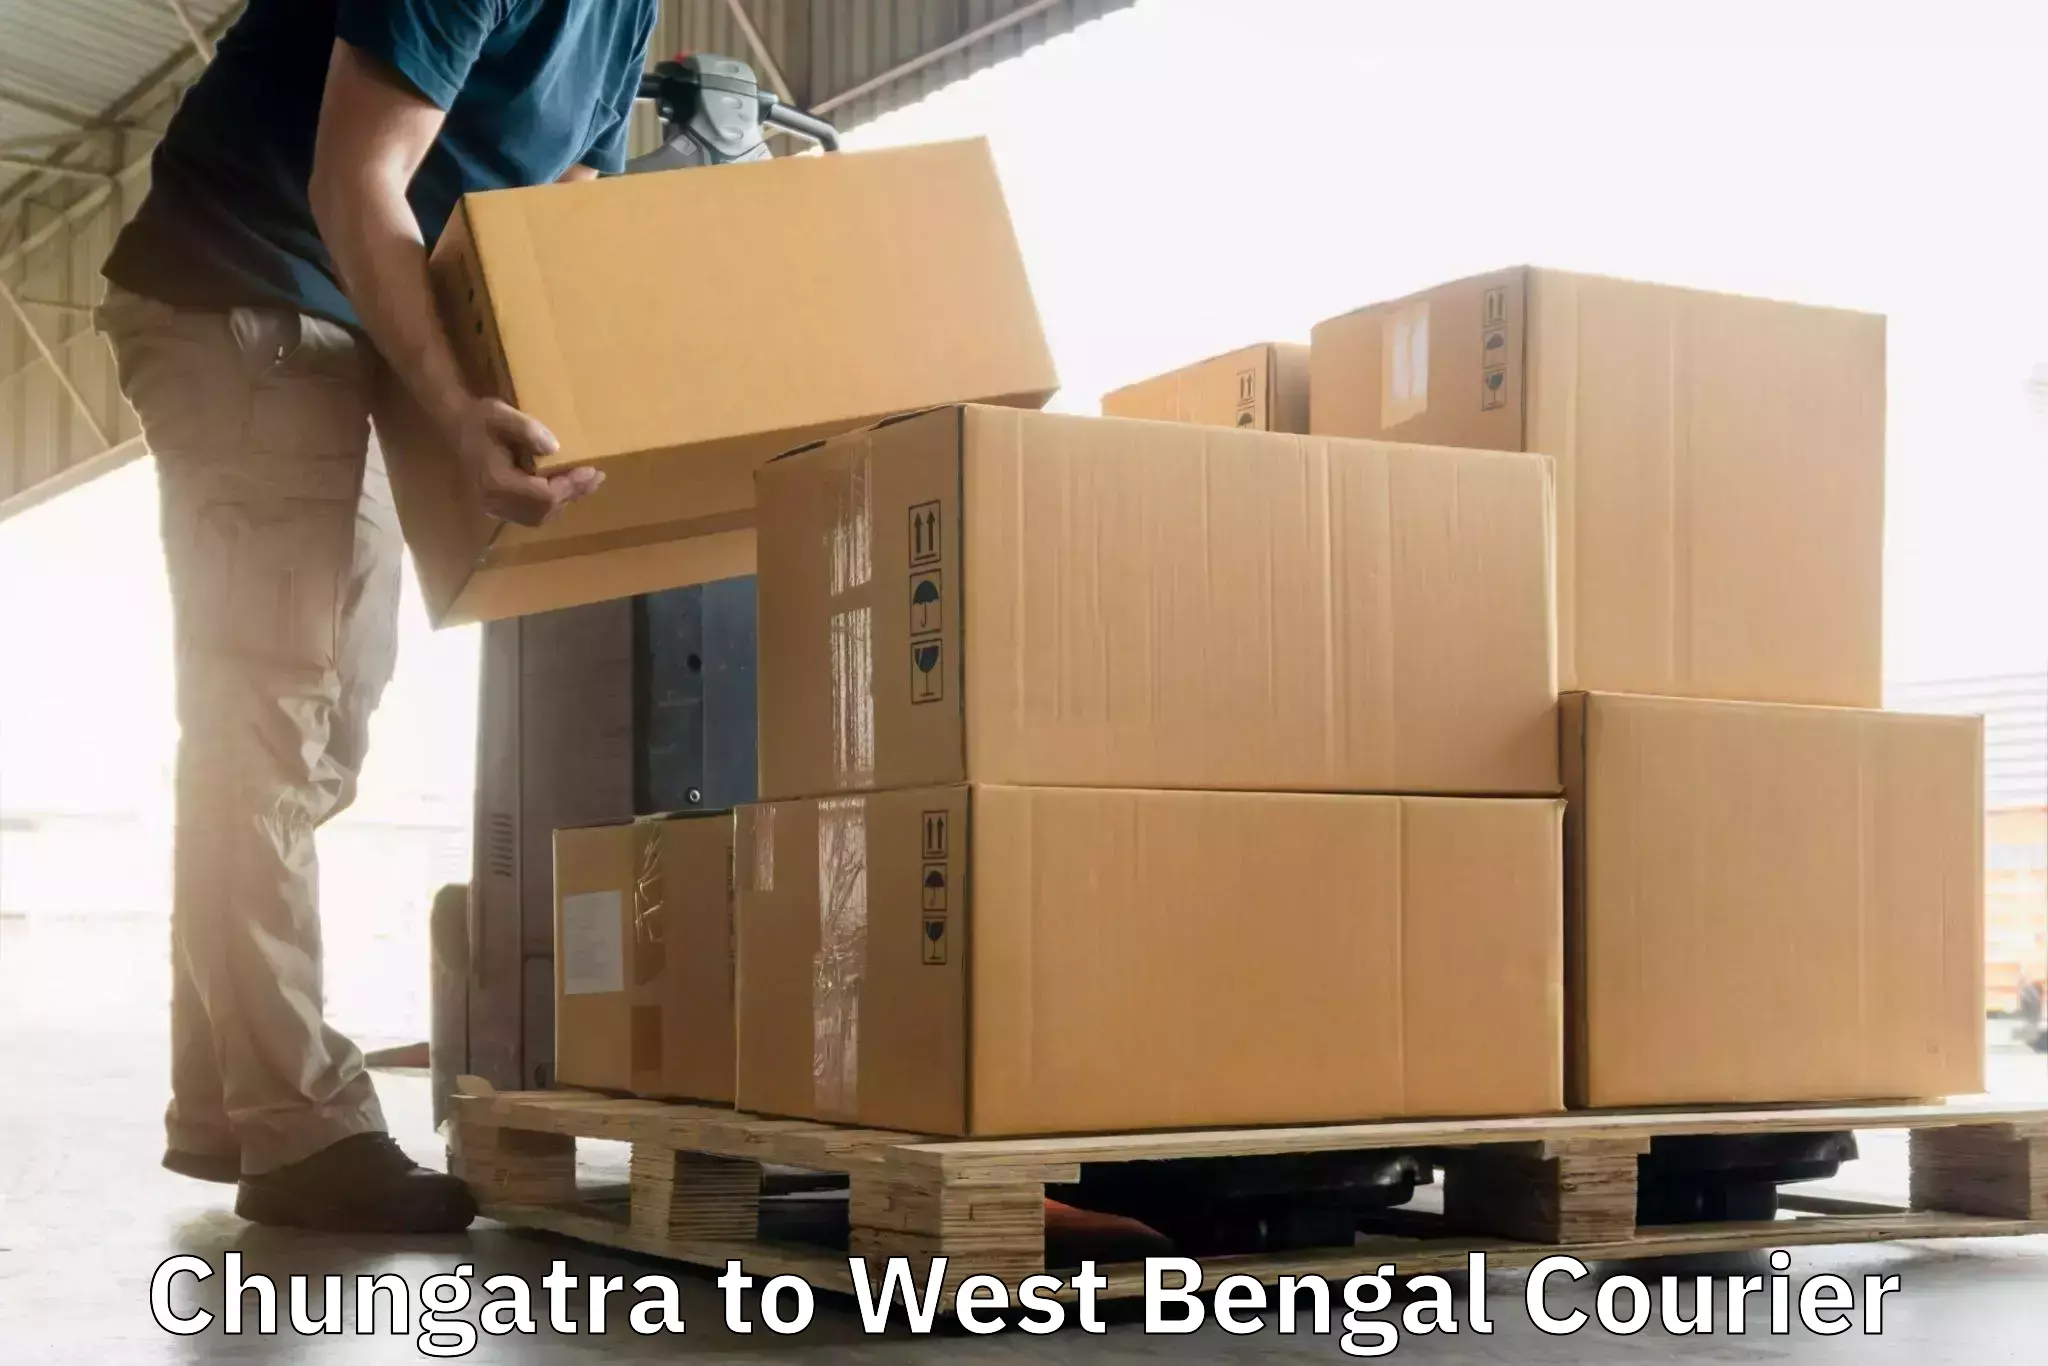 On-demand courier Chungatra to West Bengal